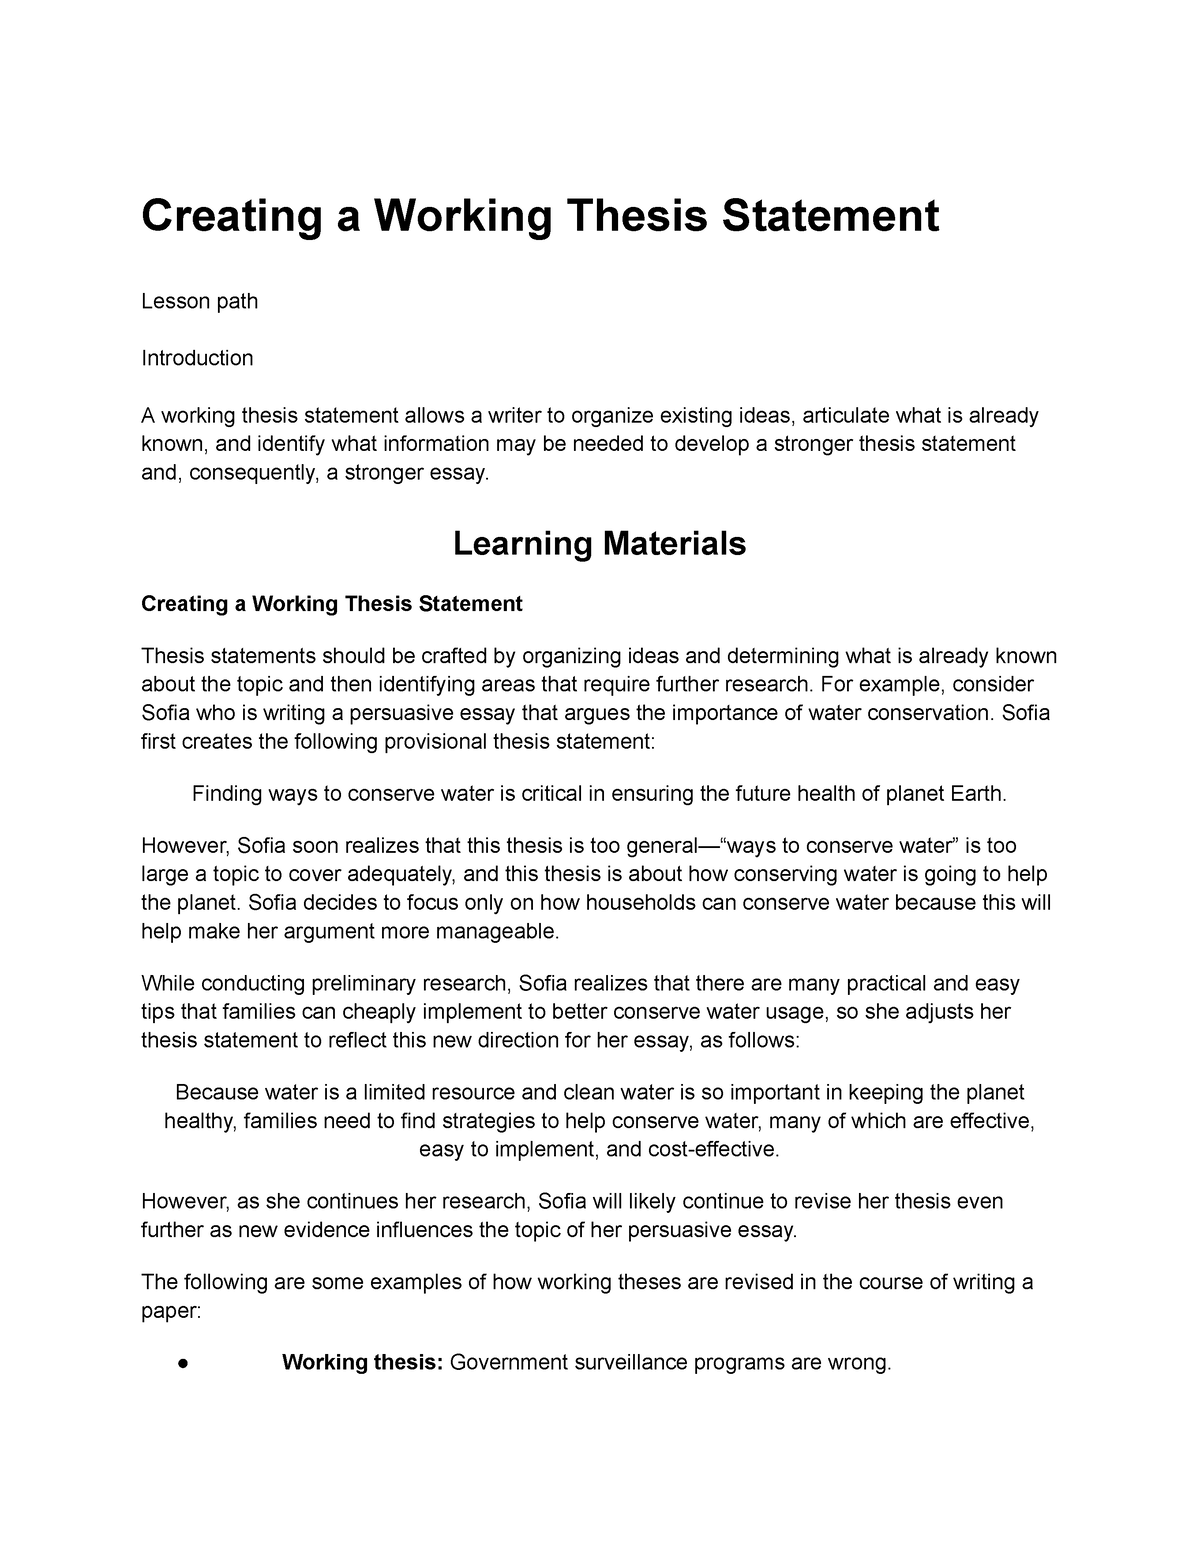 working thesis and final thesis